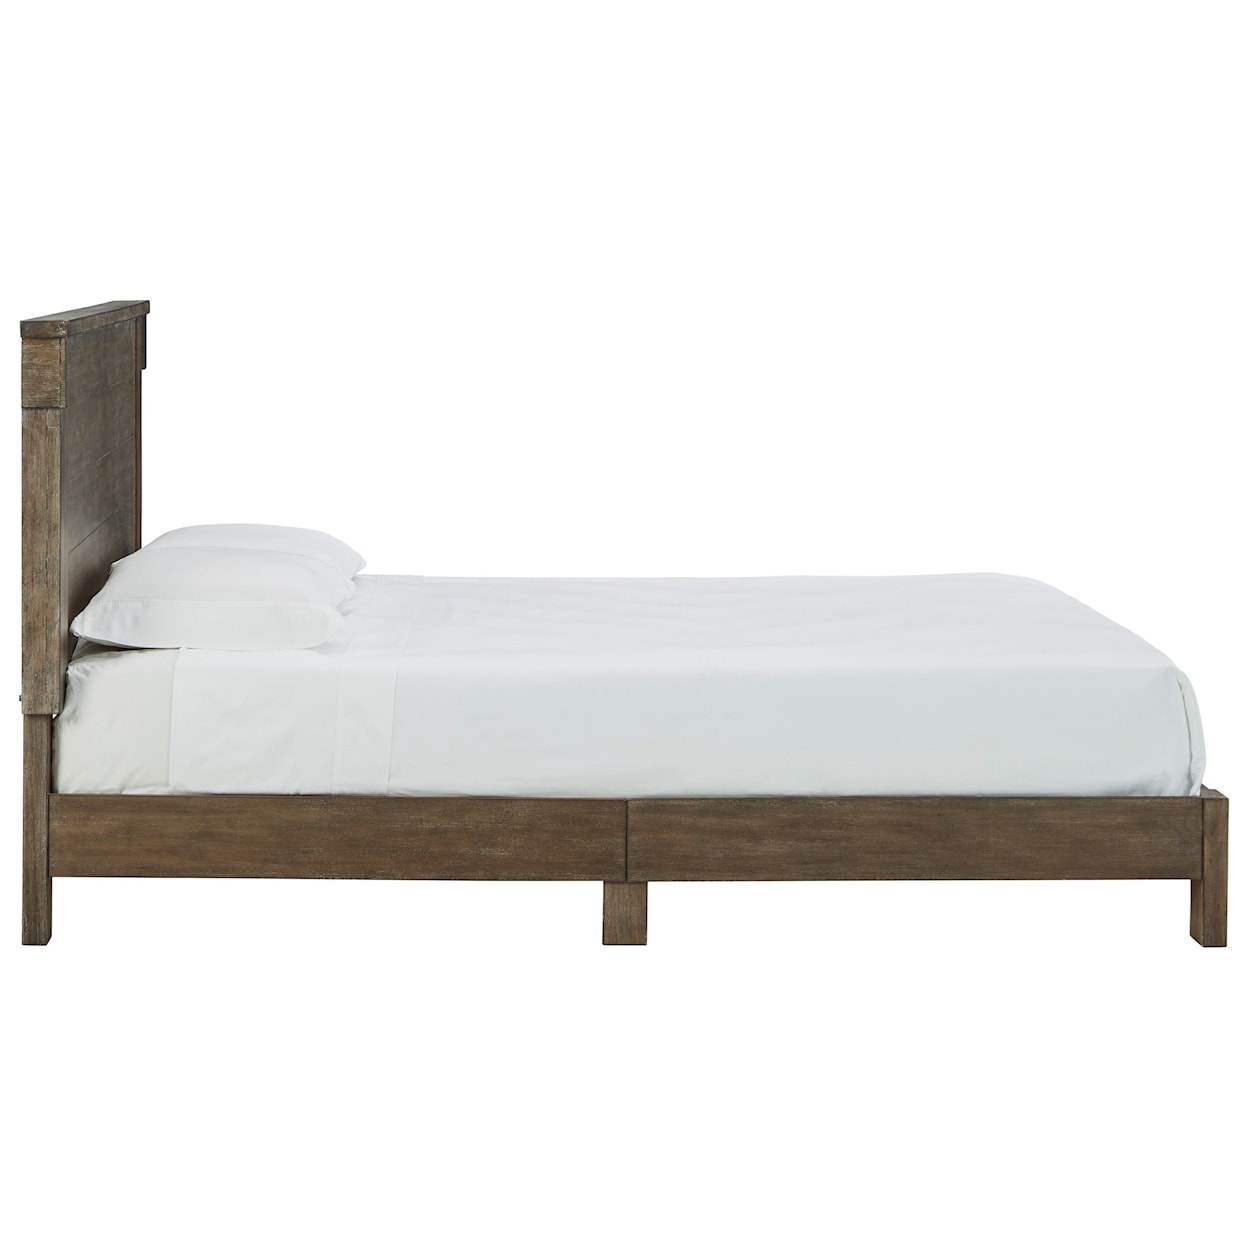 Signature Design by Ashley Shamryn King Panel Bed